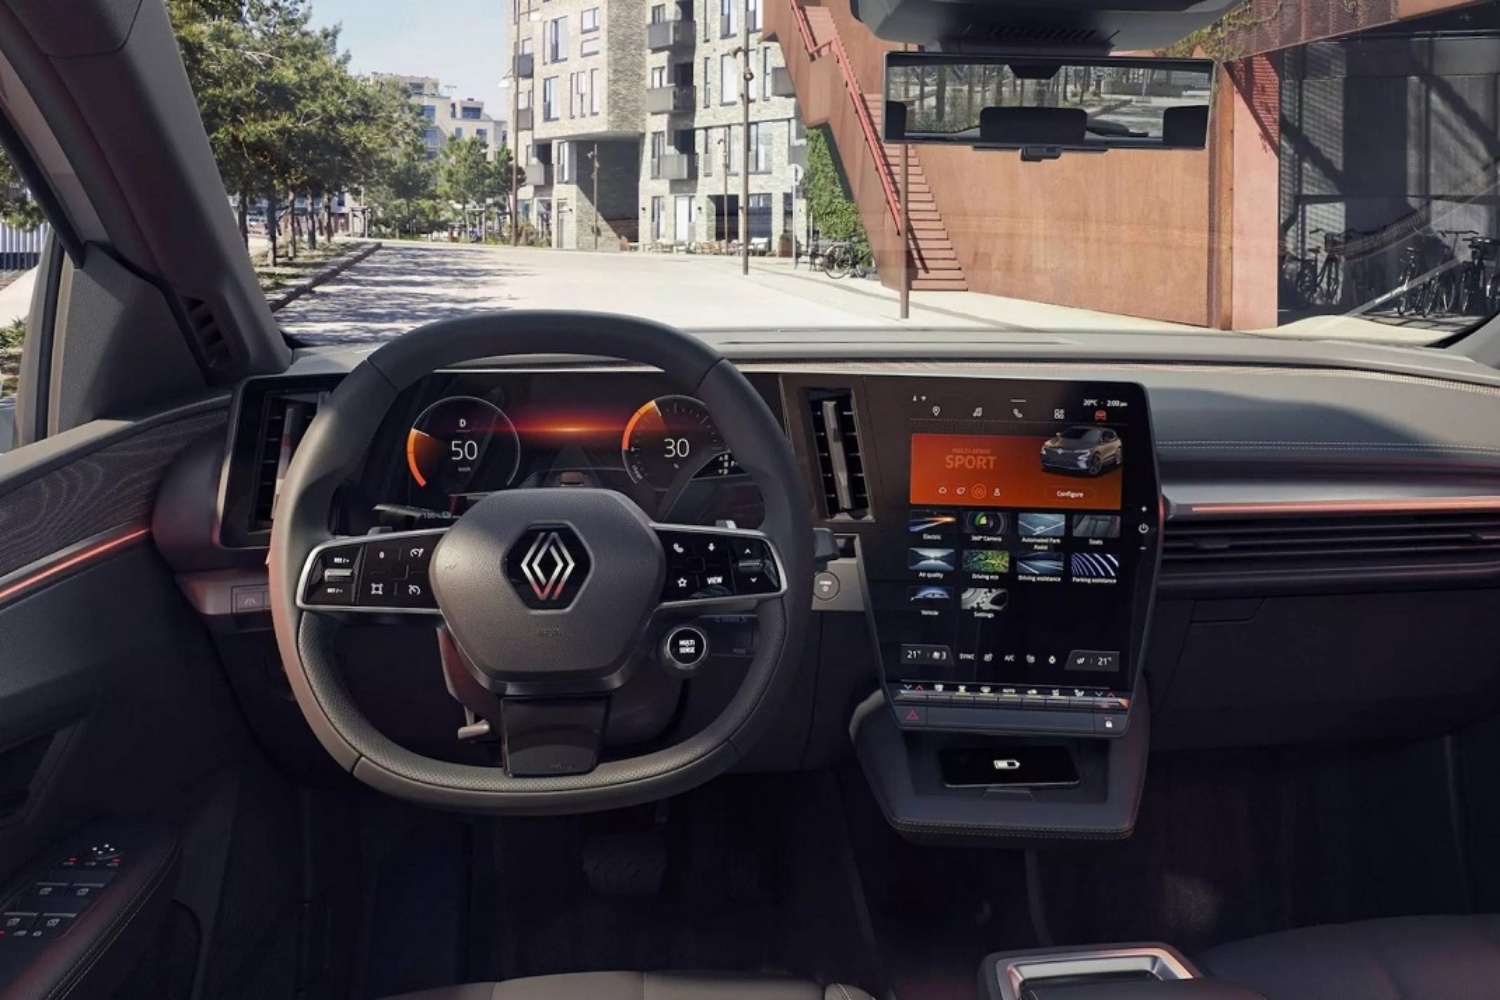 Renault Android Automotive